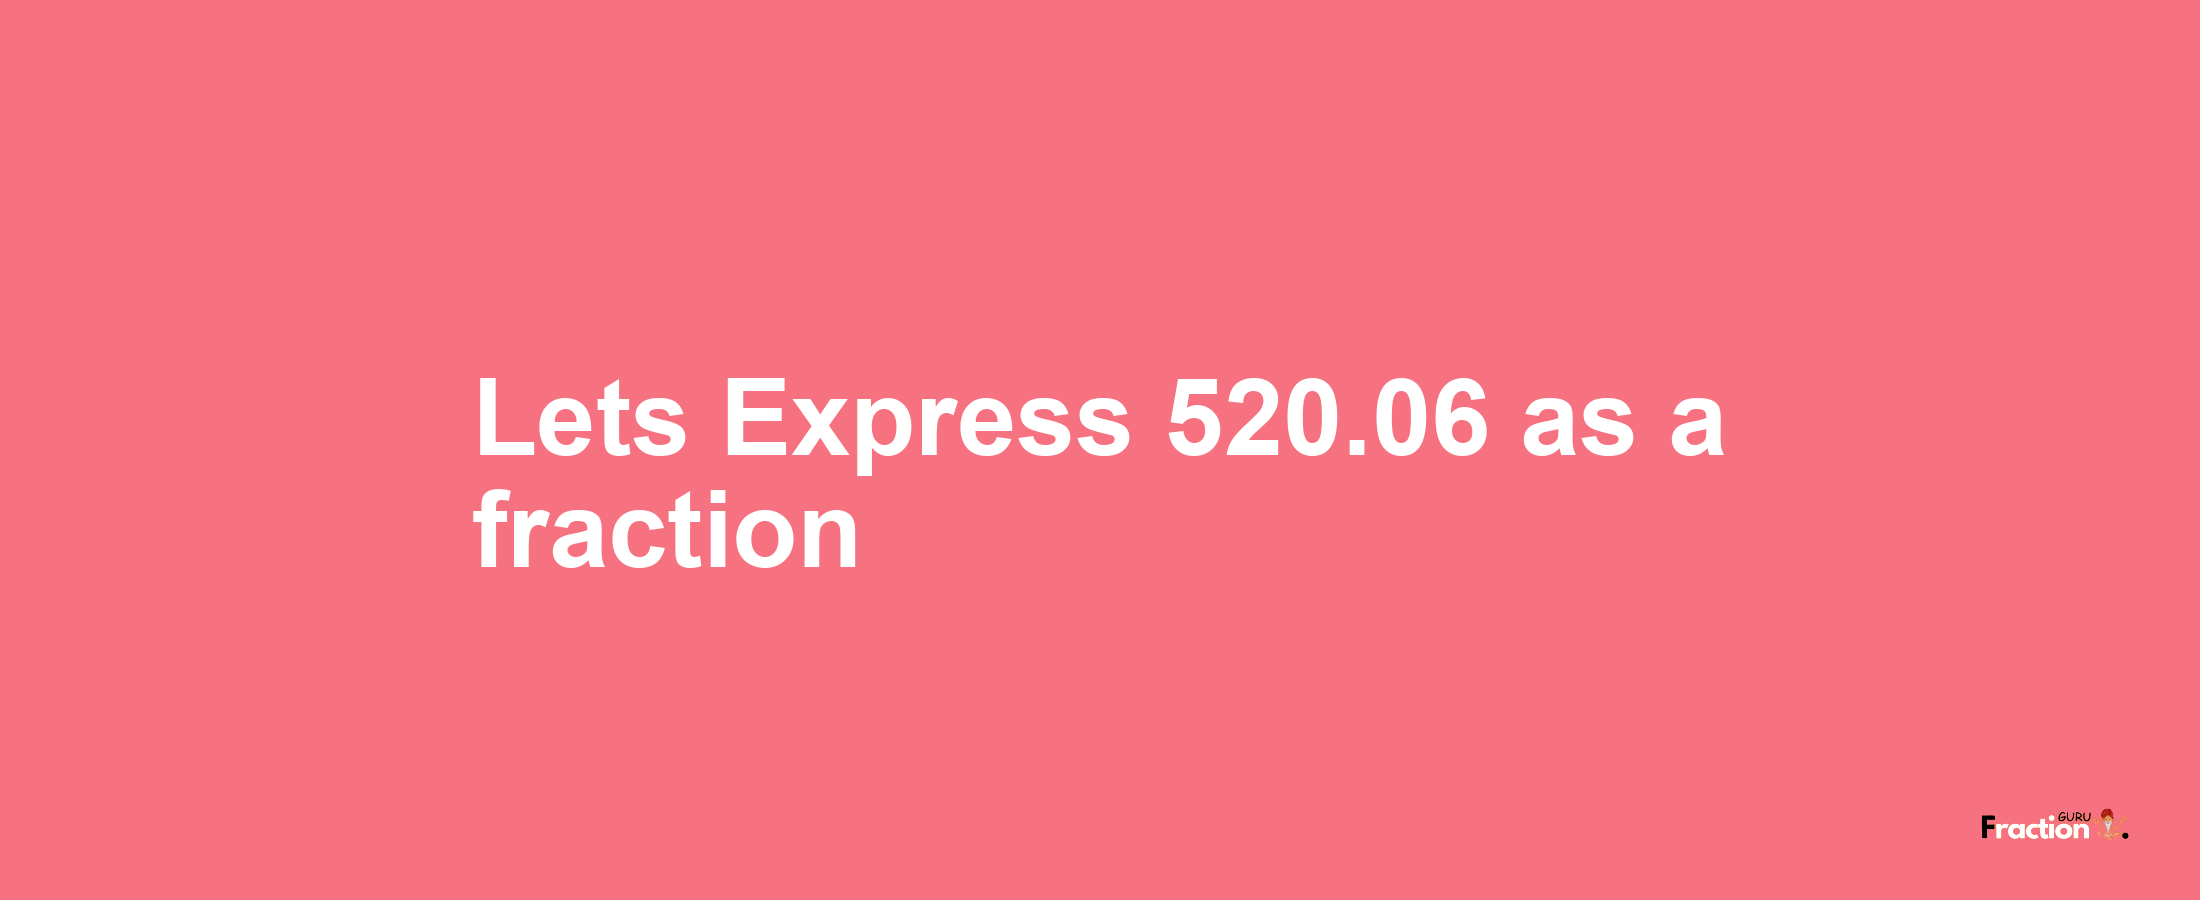 Lets Express 520.06 as afraction